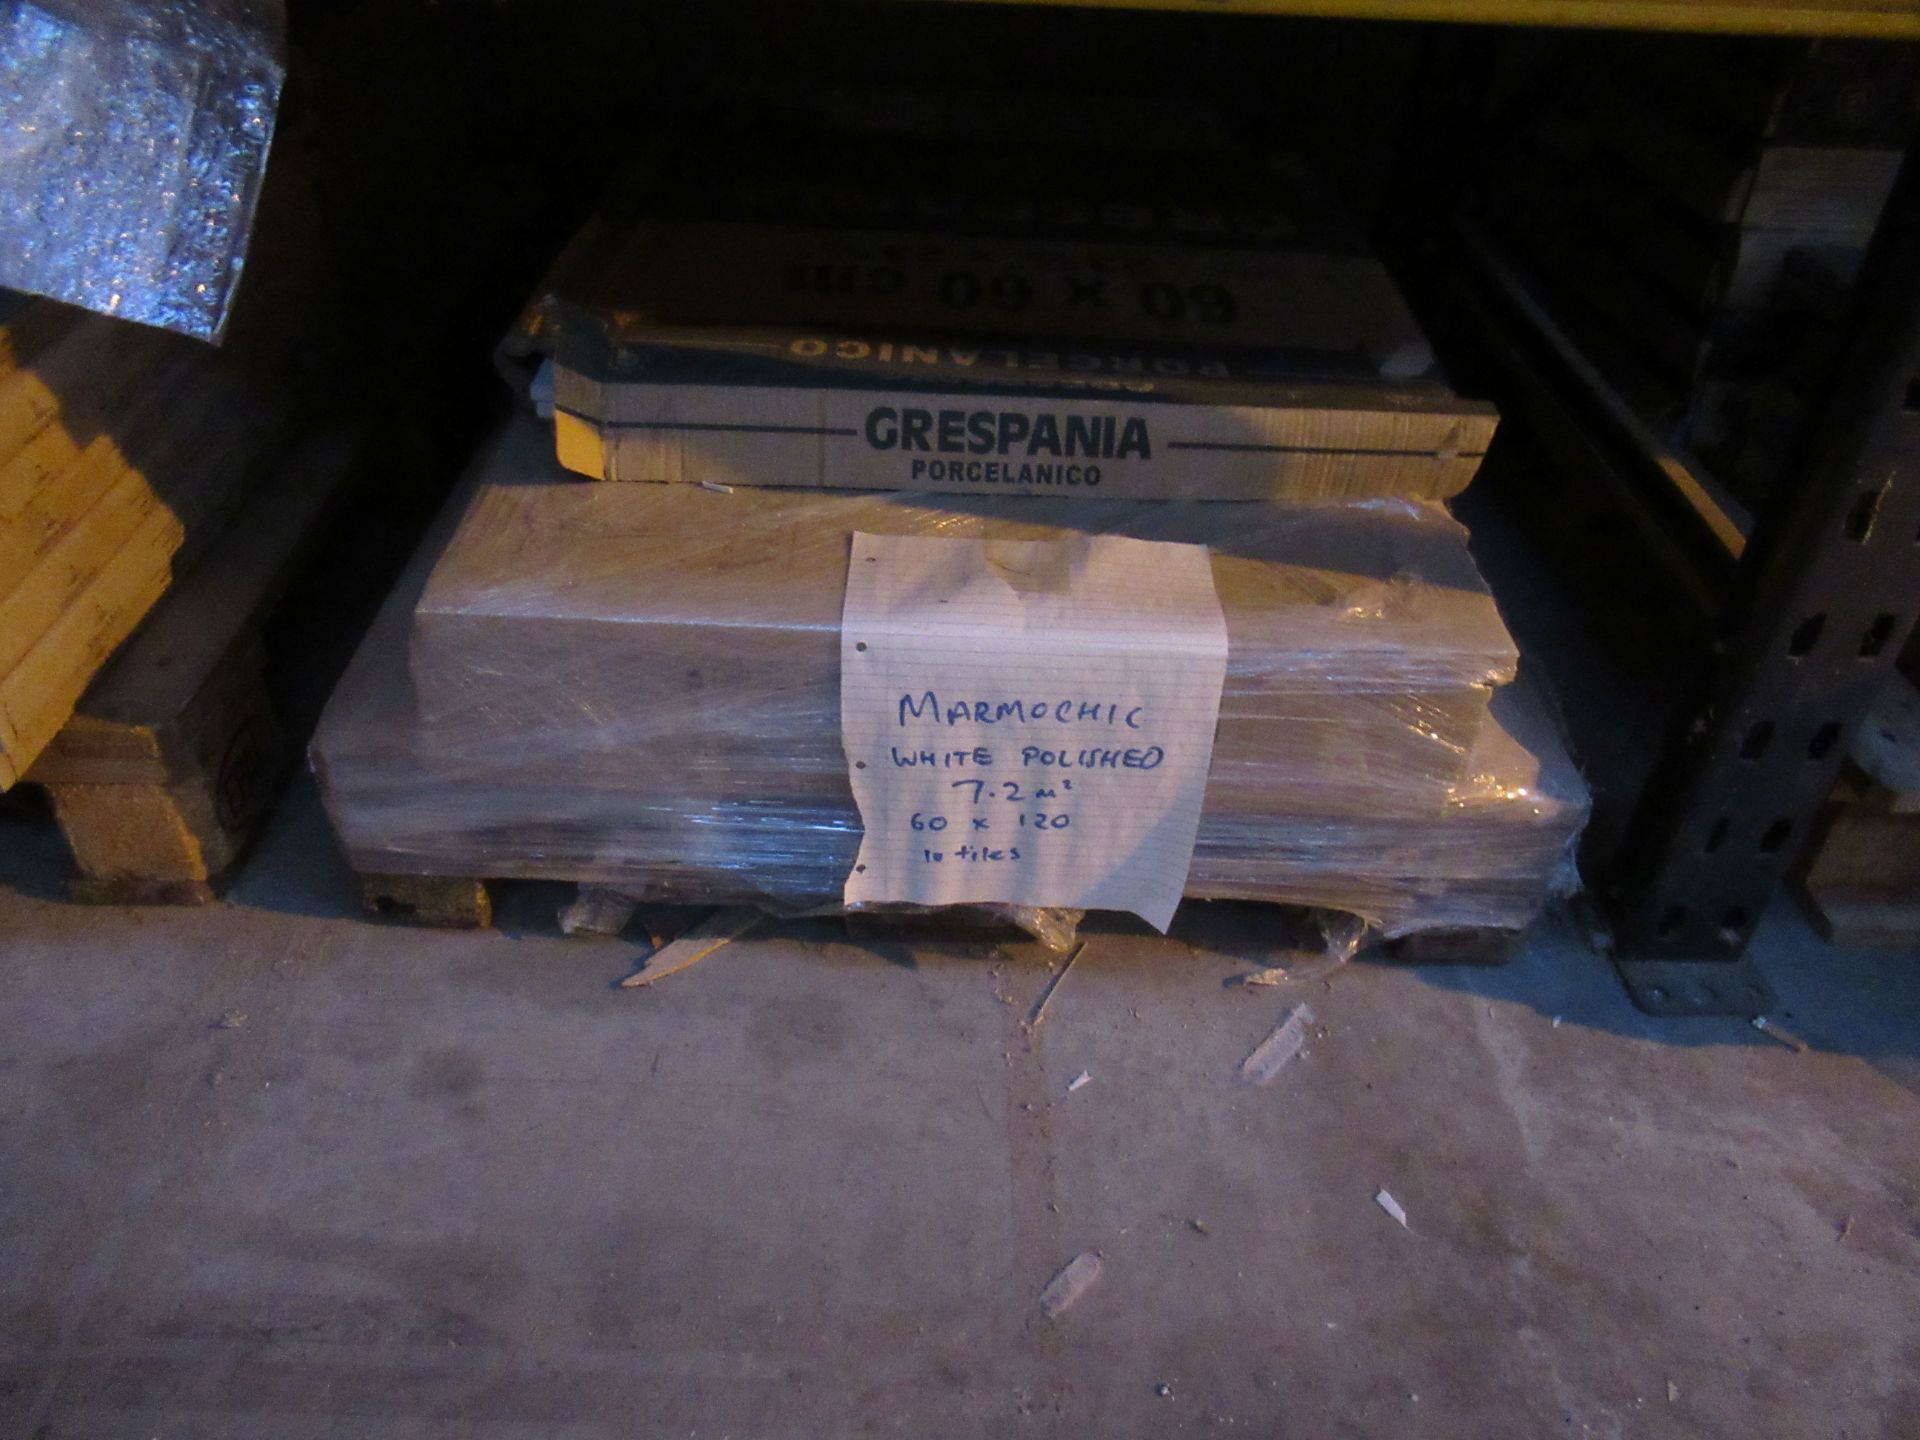 Contents of Pallet Racking Bay inc. A Variety of Grespania Ceramic Tiles - Image 3 of 11